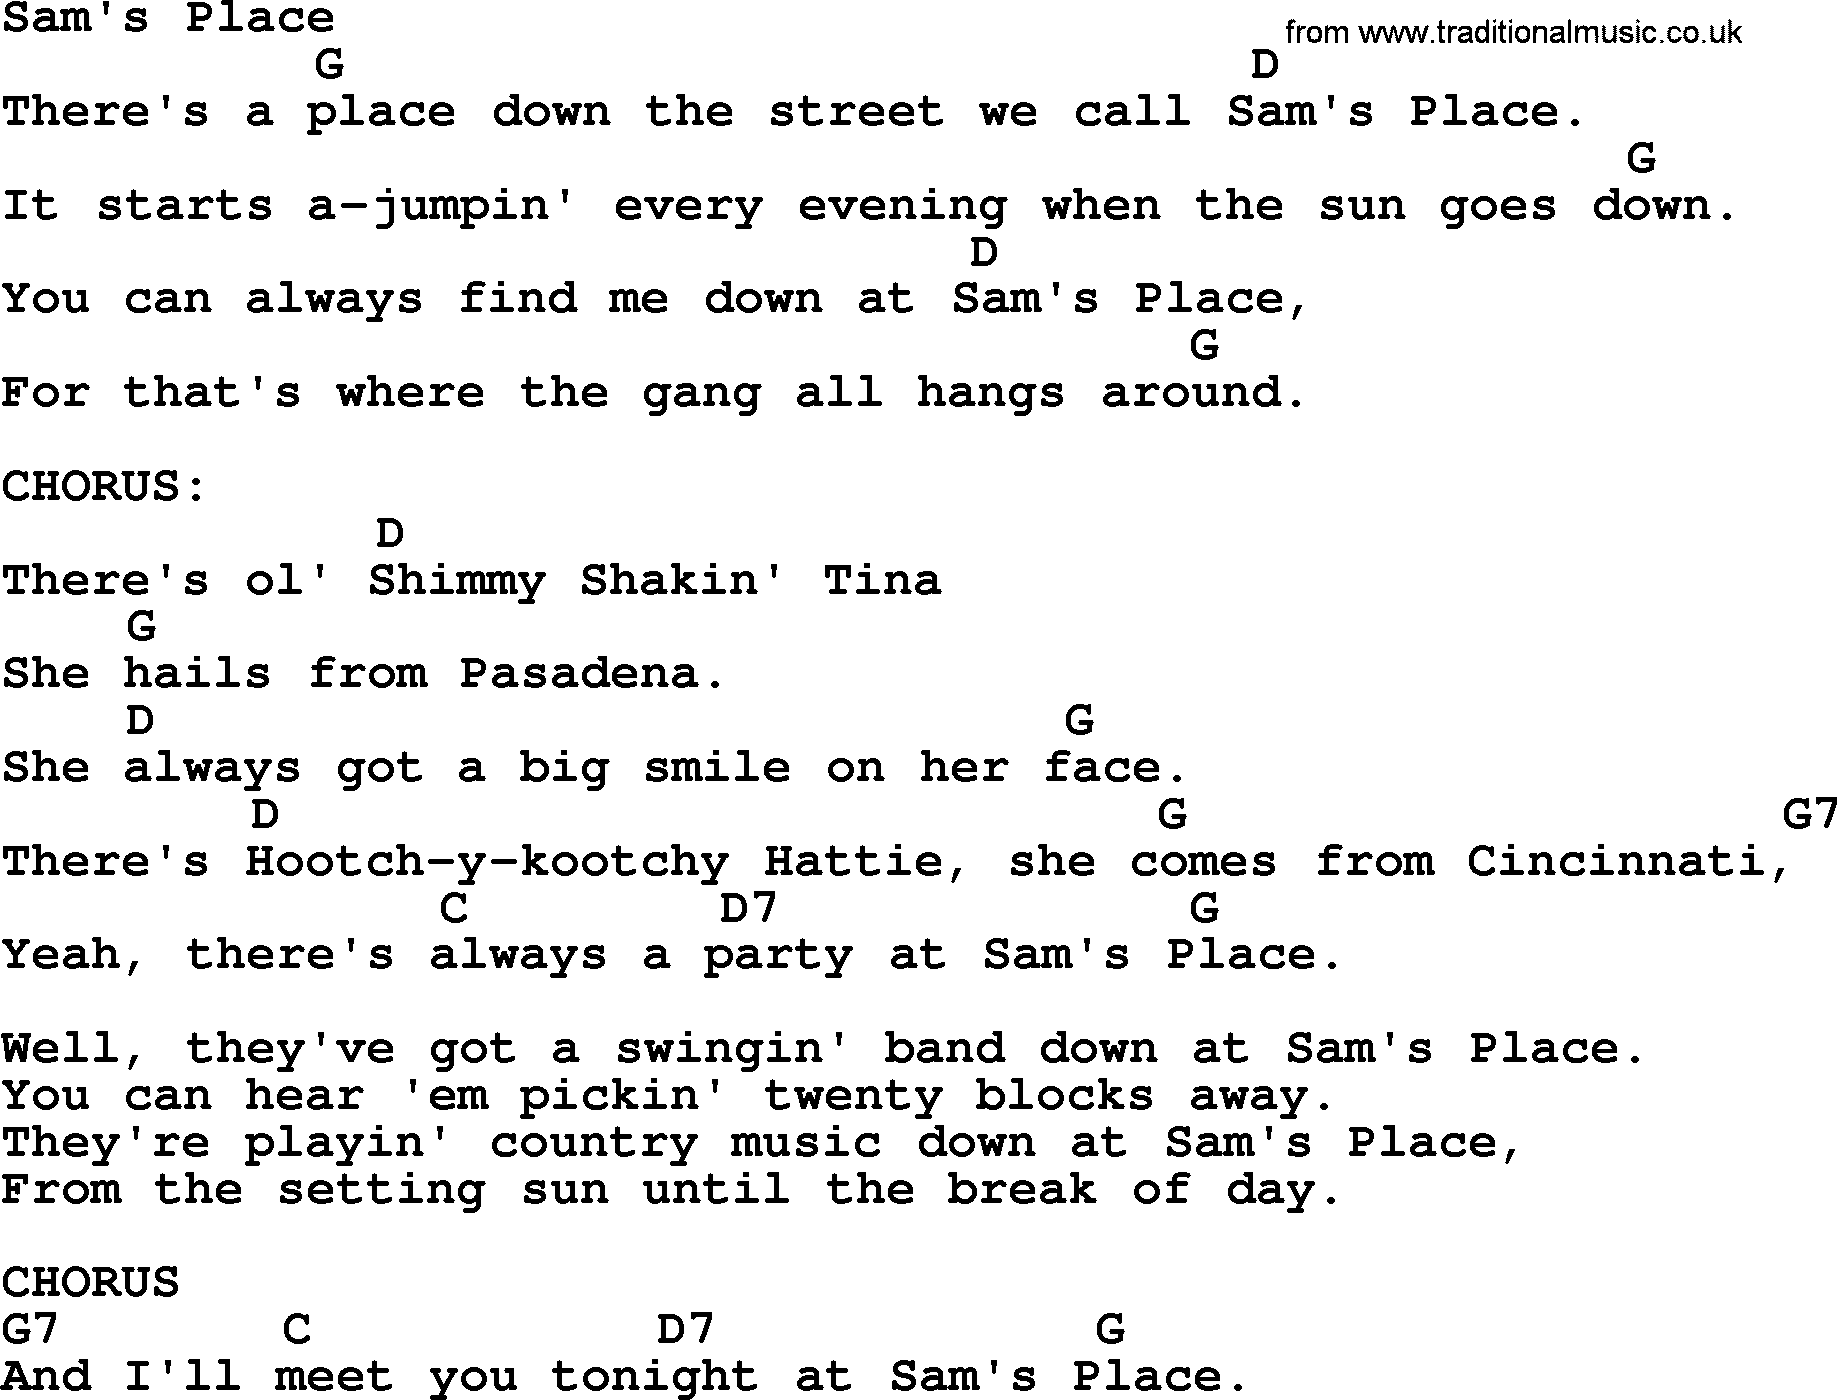 Bluegrass song: Sam's Place, lyrics and chords